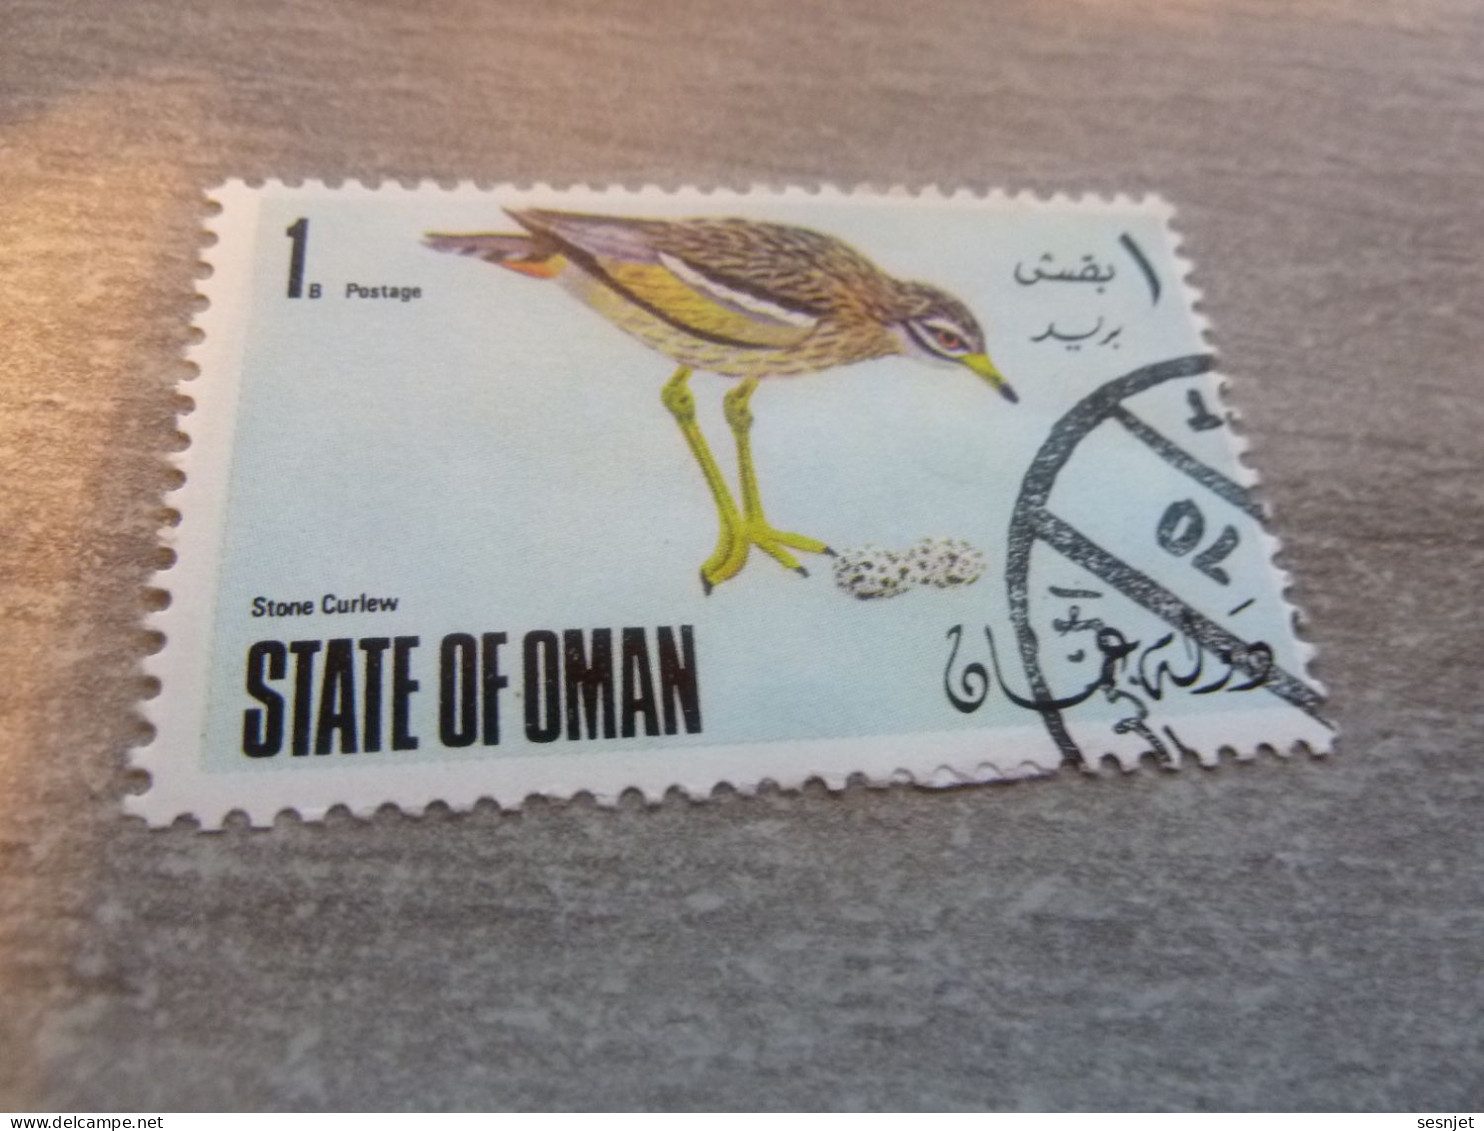 State Of Oman - Stone Curlew -  Val 1 B - Postage - Polychrome - Oblitéré - Année 1970 - - Sparrows